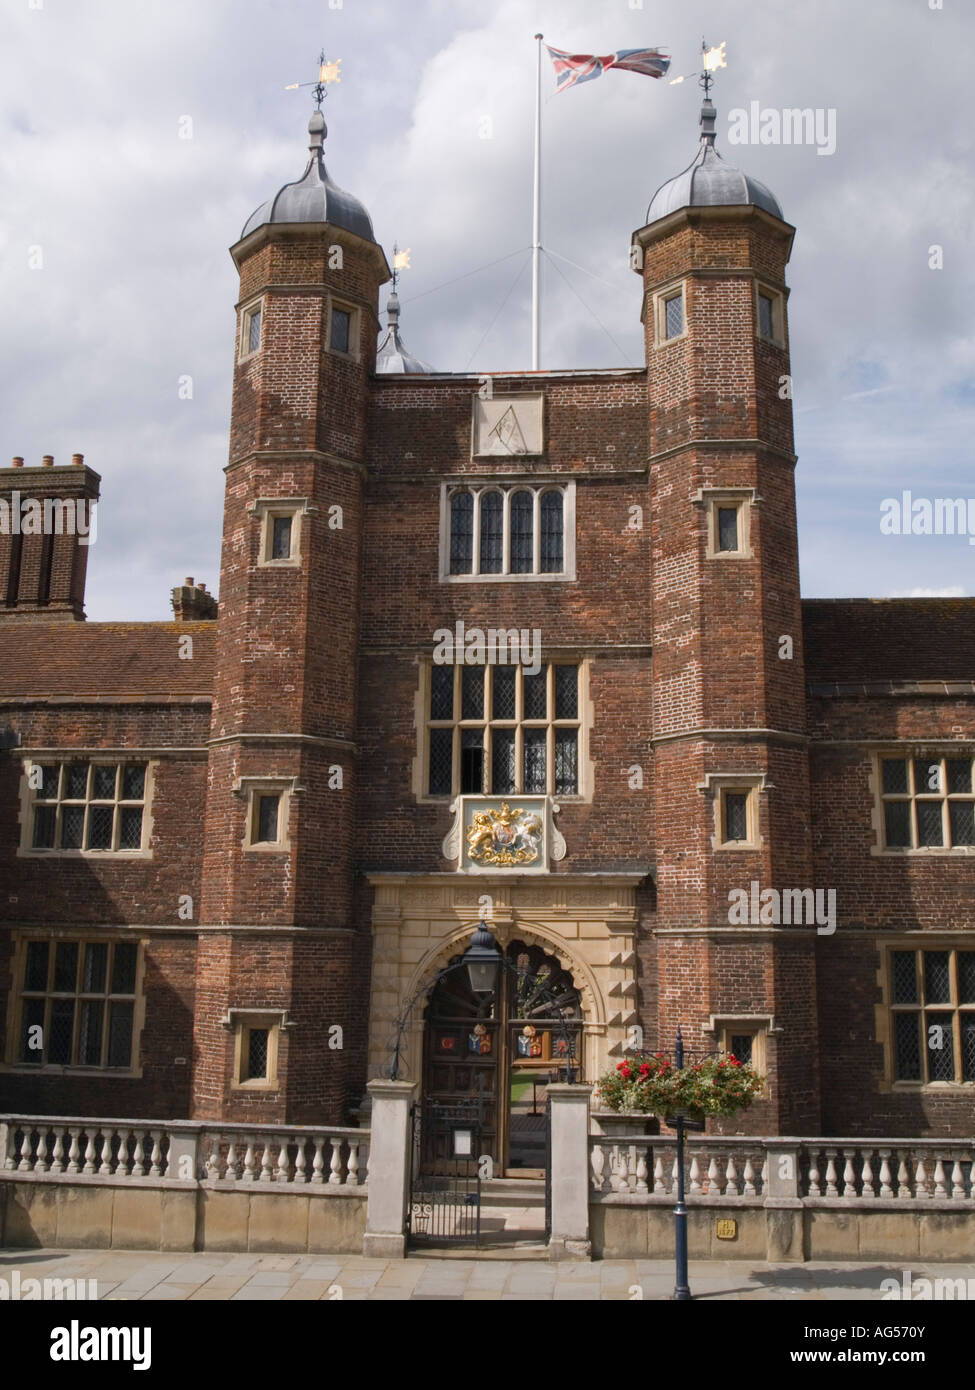 Hospital of the Blessed Trinity or Abbot s Hospital front exterior Jacobean almshouse Guildford Surrey England UK Stock Photo